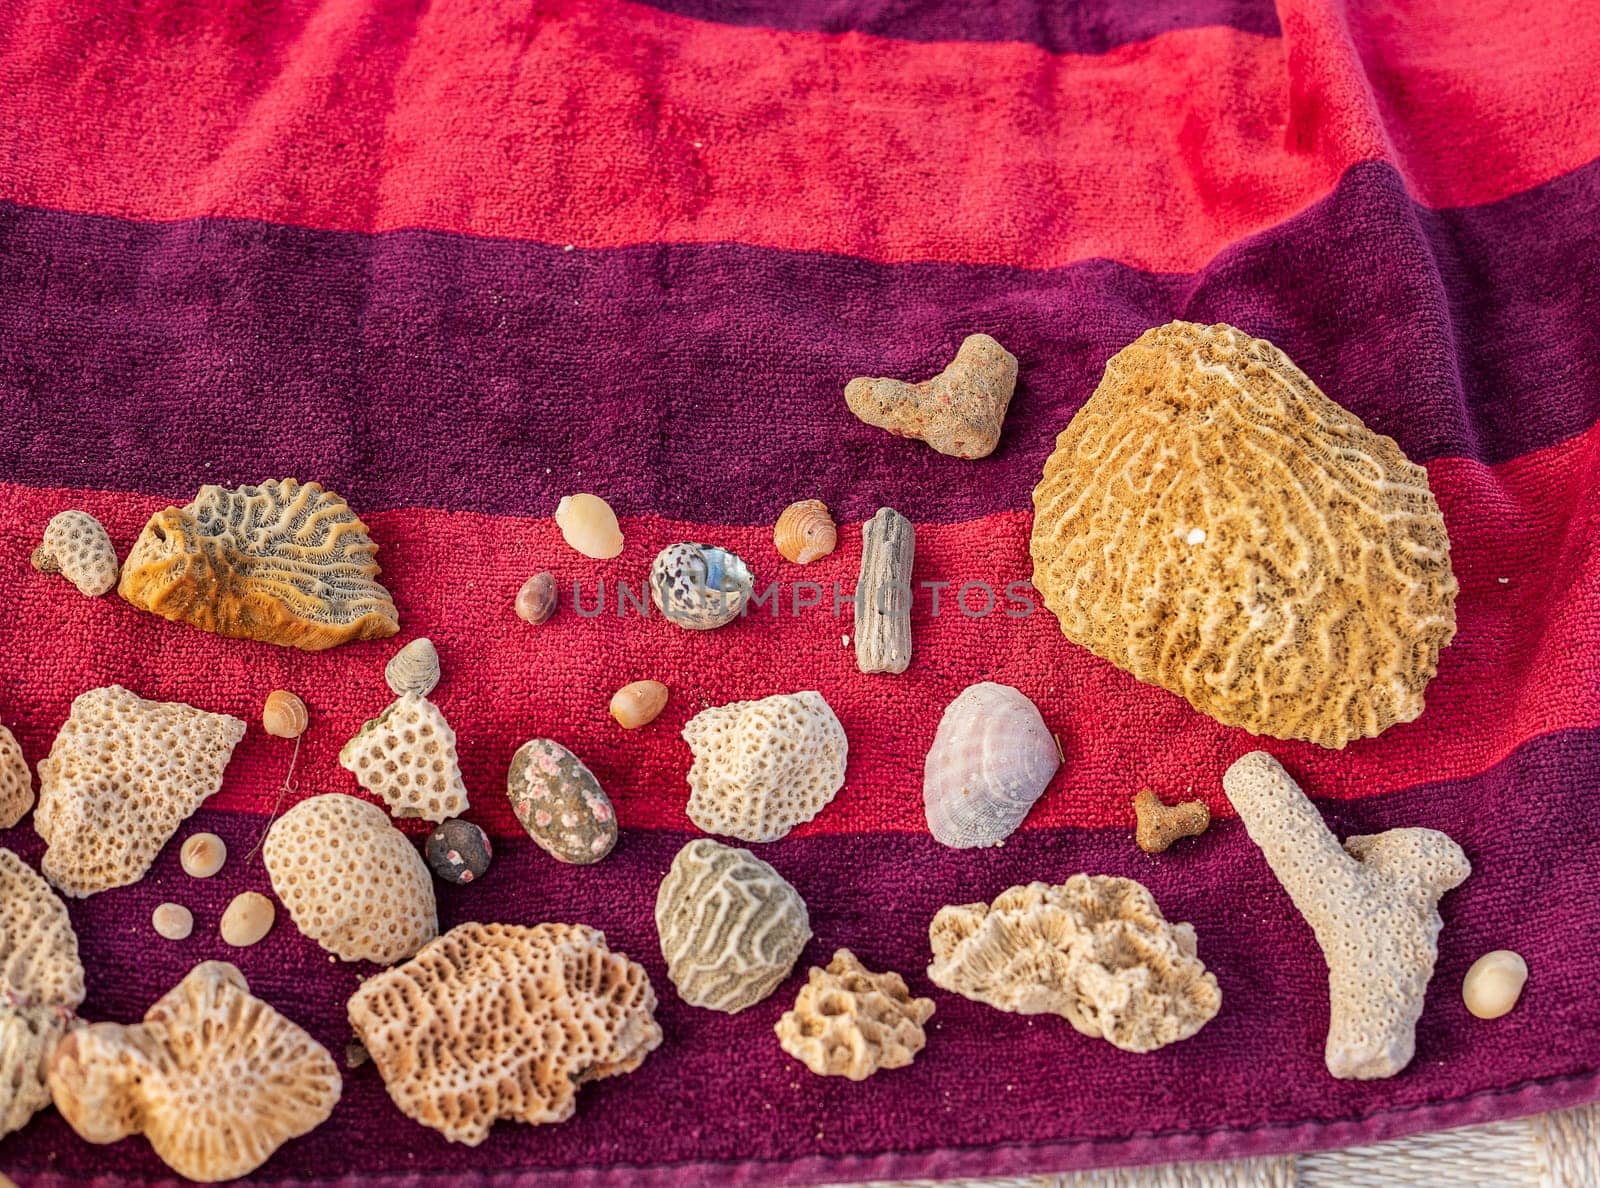 various pieces of coral, shells and snails collected from the beach on a towel